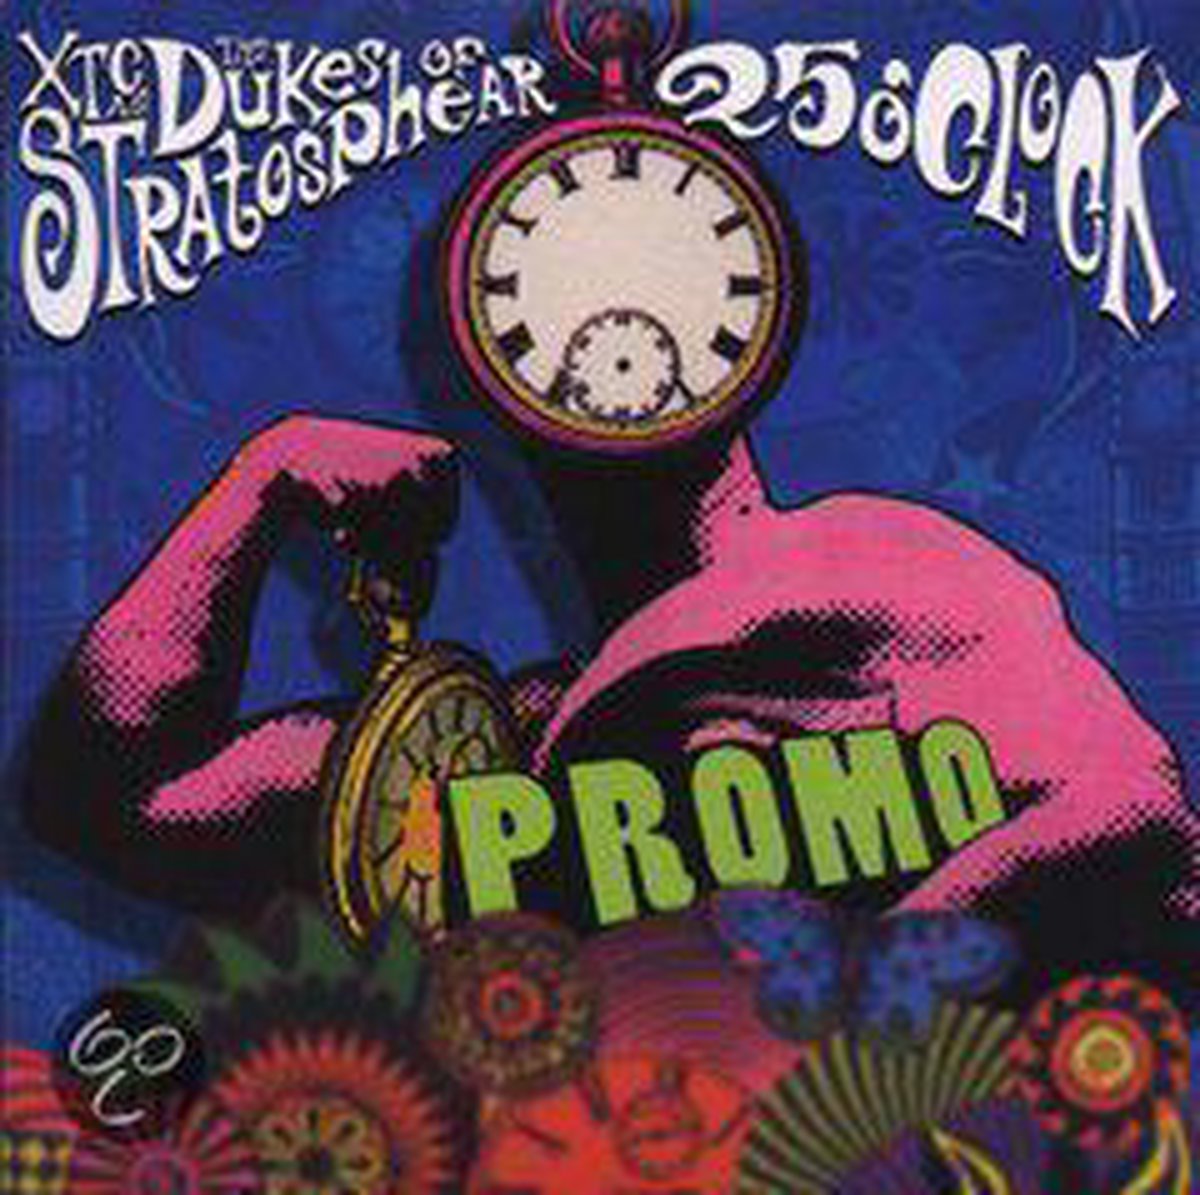 25 O'Clock (Remastered) - Xtc As The Dukes Of Stratosphear